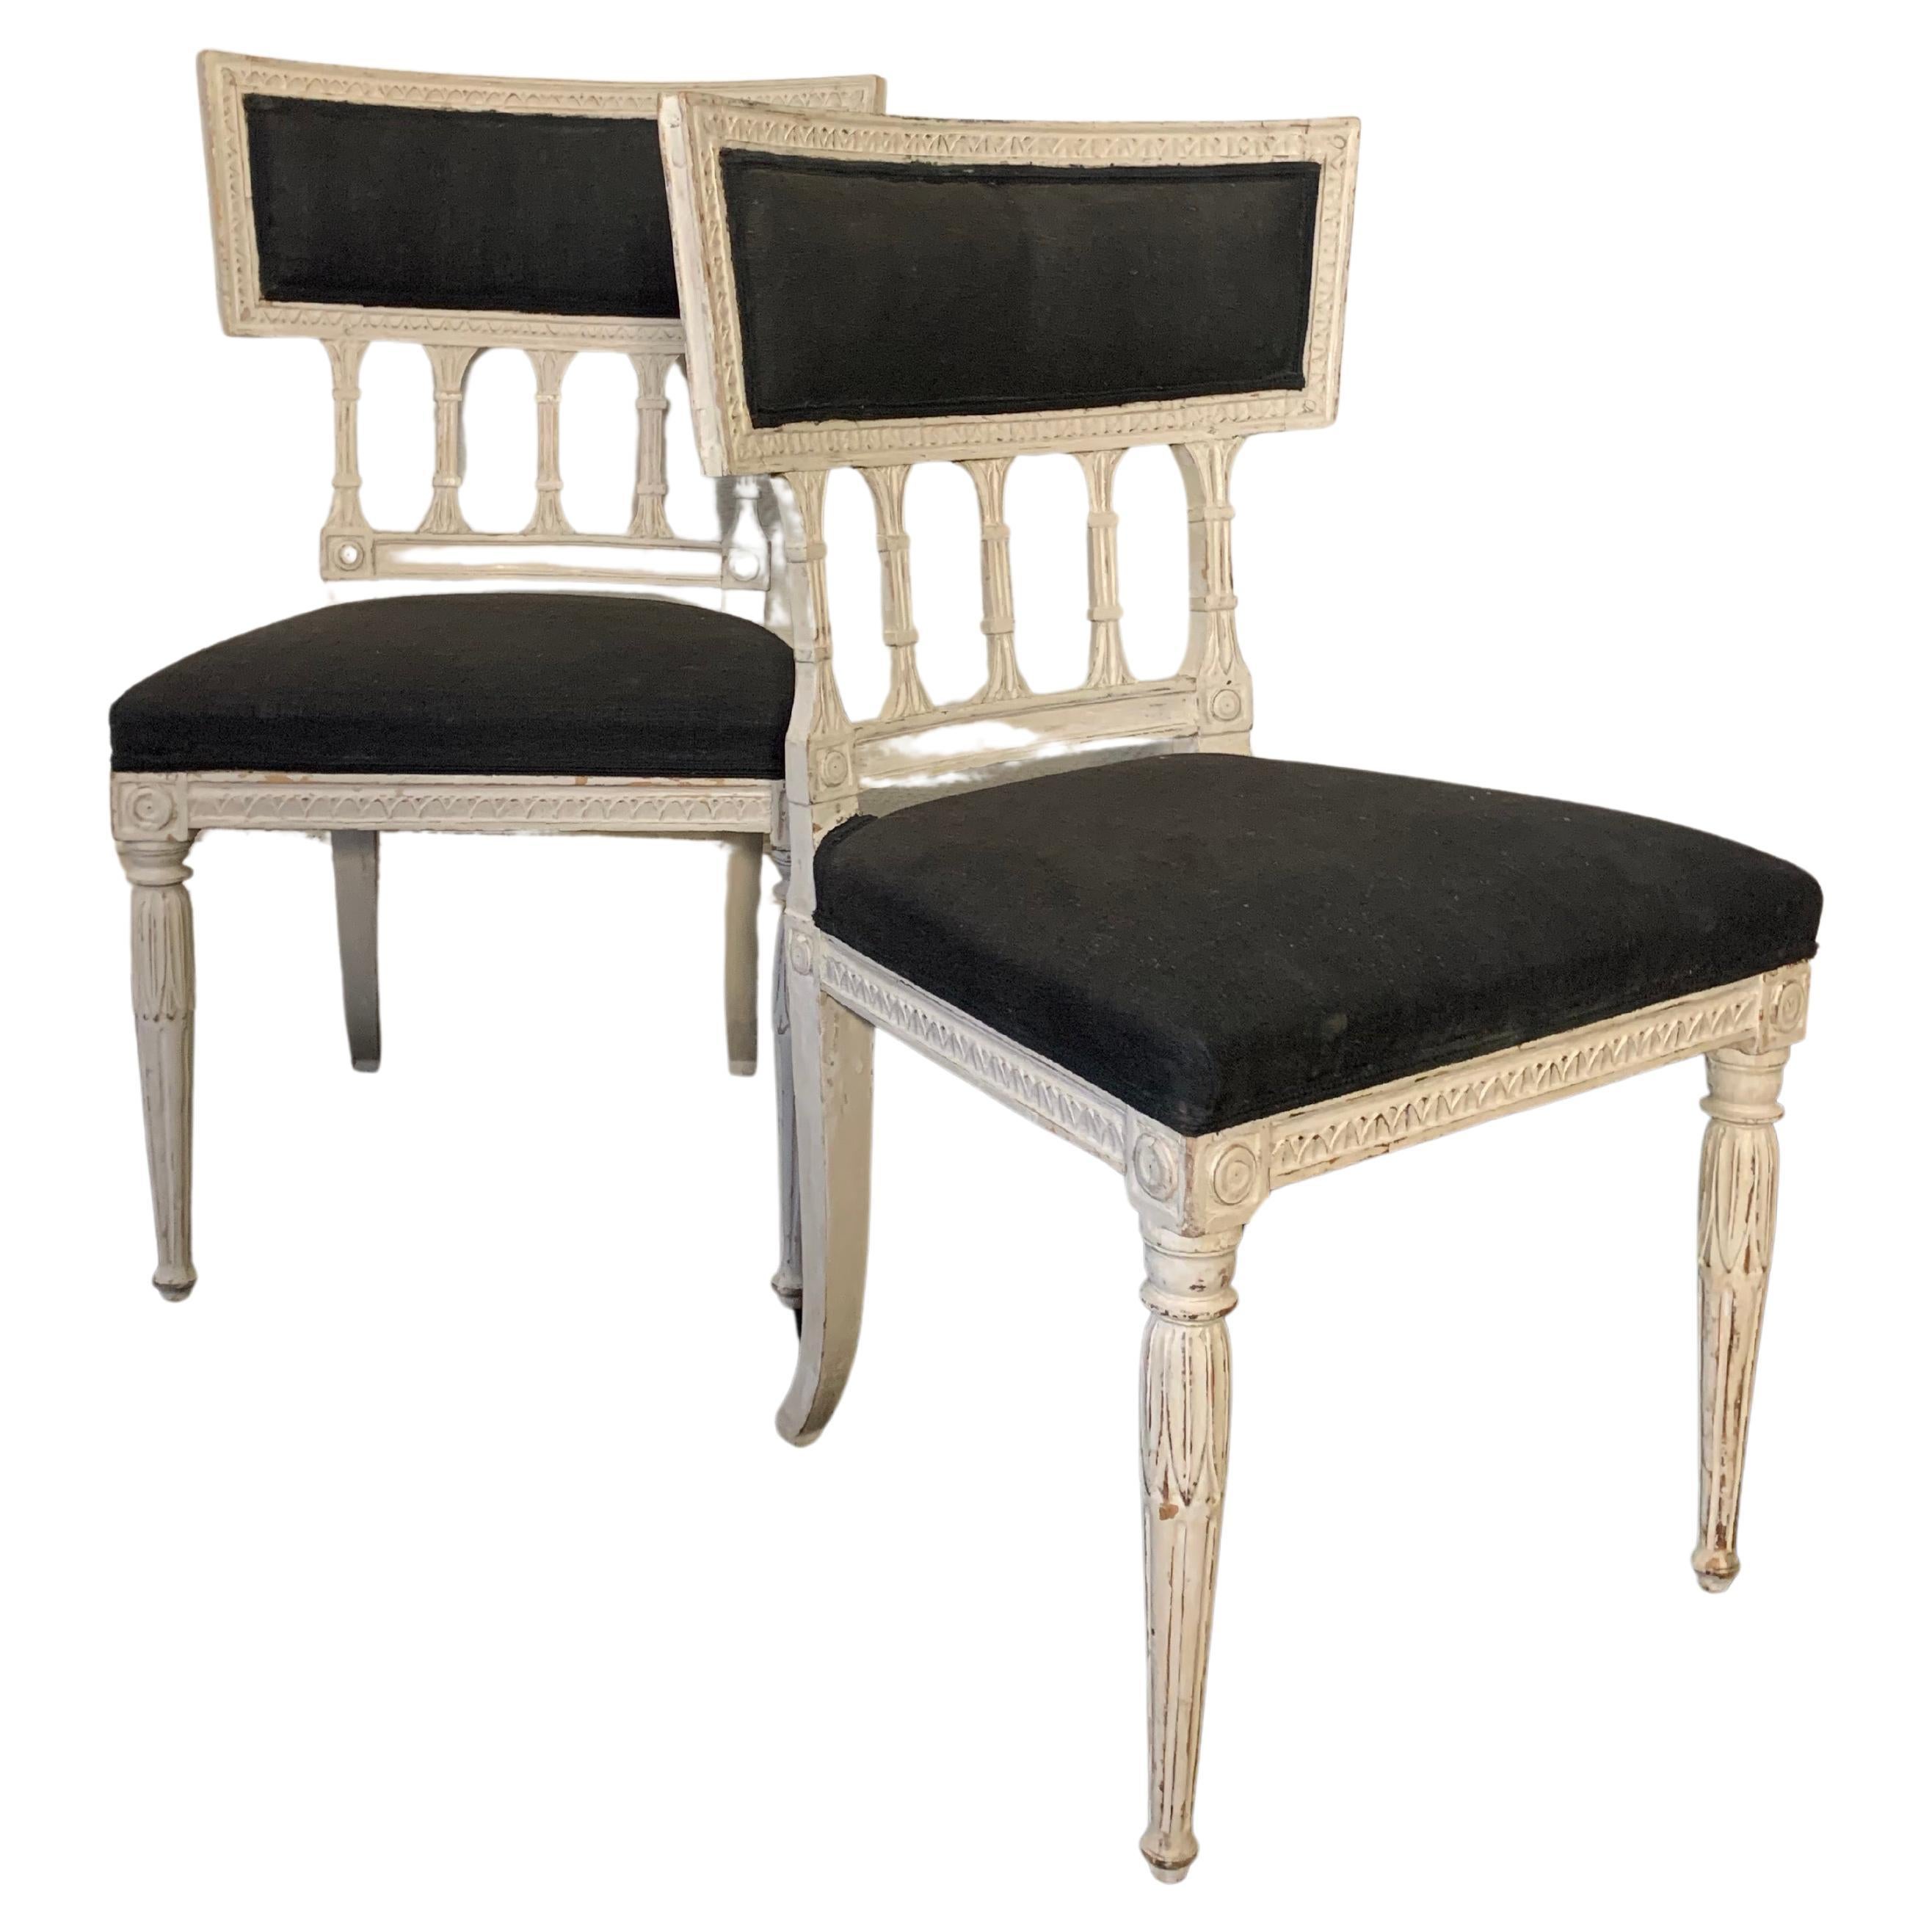 6 equal chairs, early 19th Century, Late Gustavian, made by Ephraim Sthal